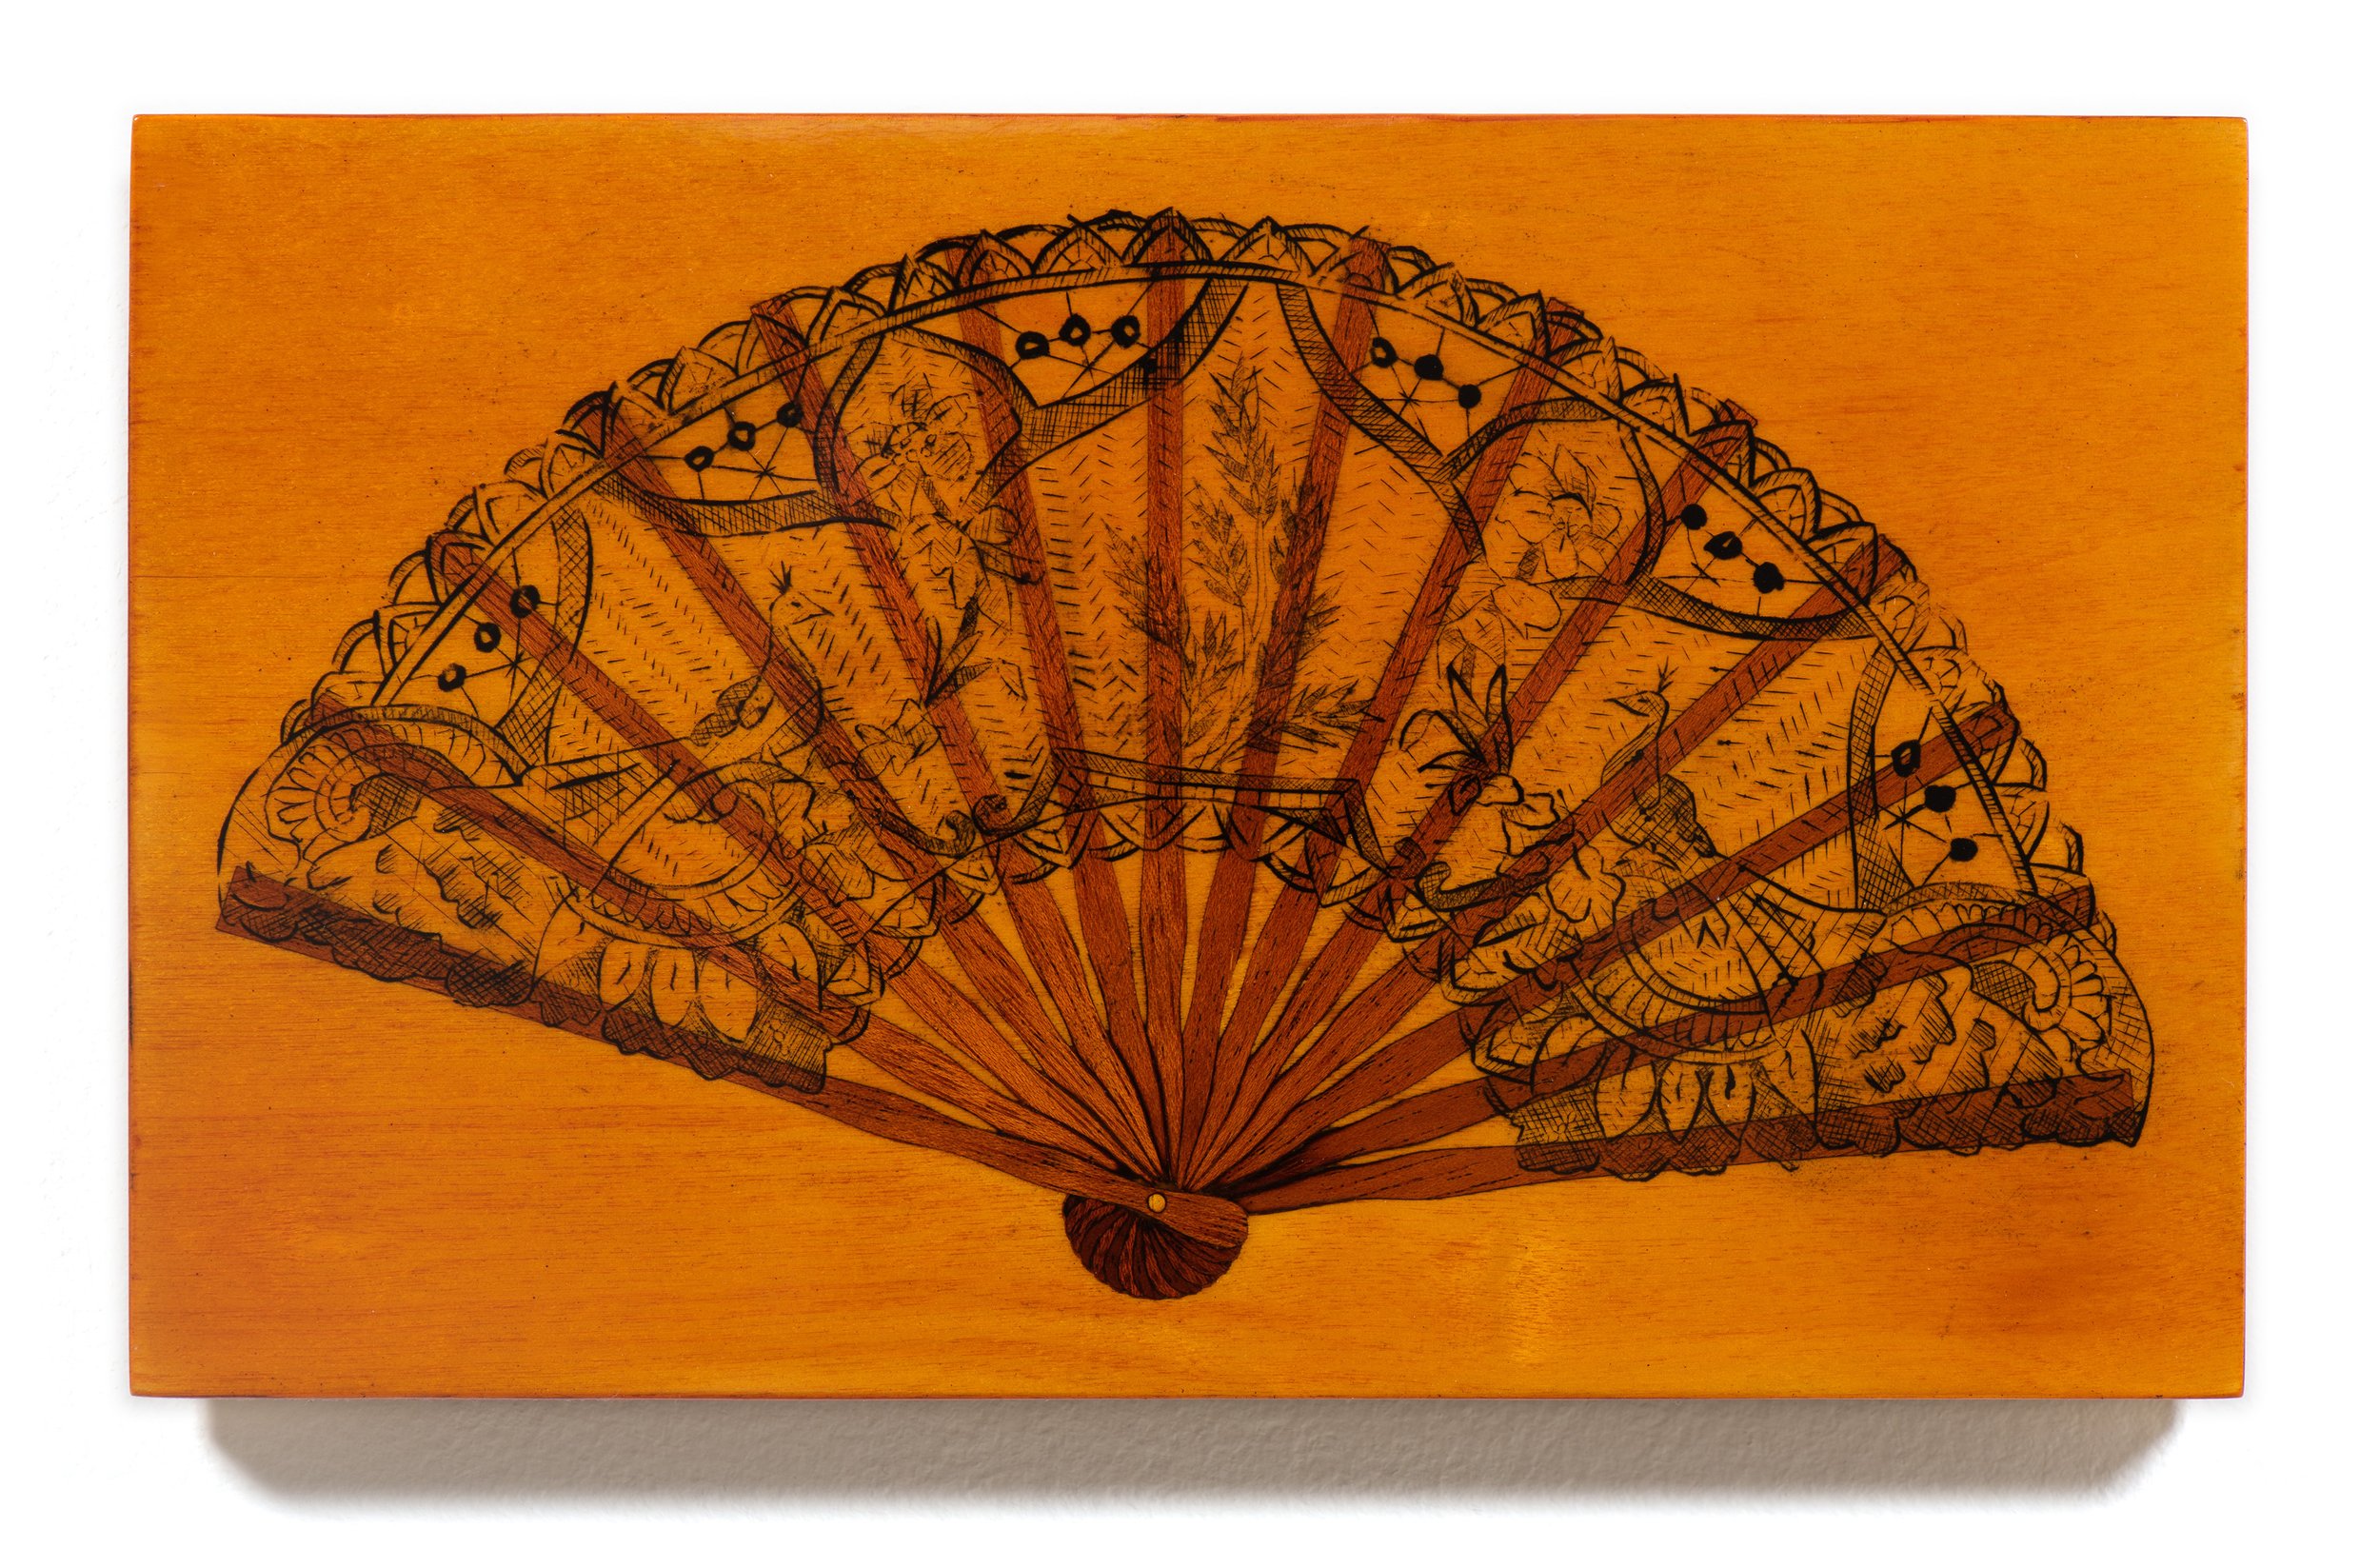   Chantilly Fan , 2021  Wood and shellac  5 x 8 1/4 x 1/2 inches 